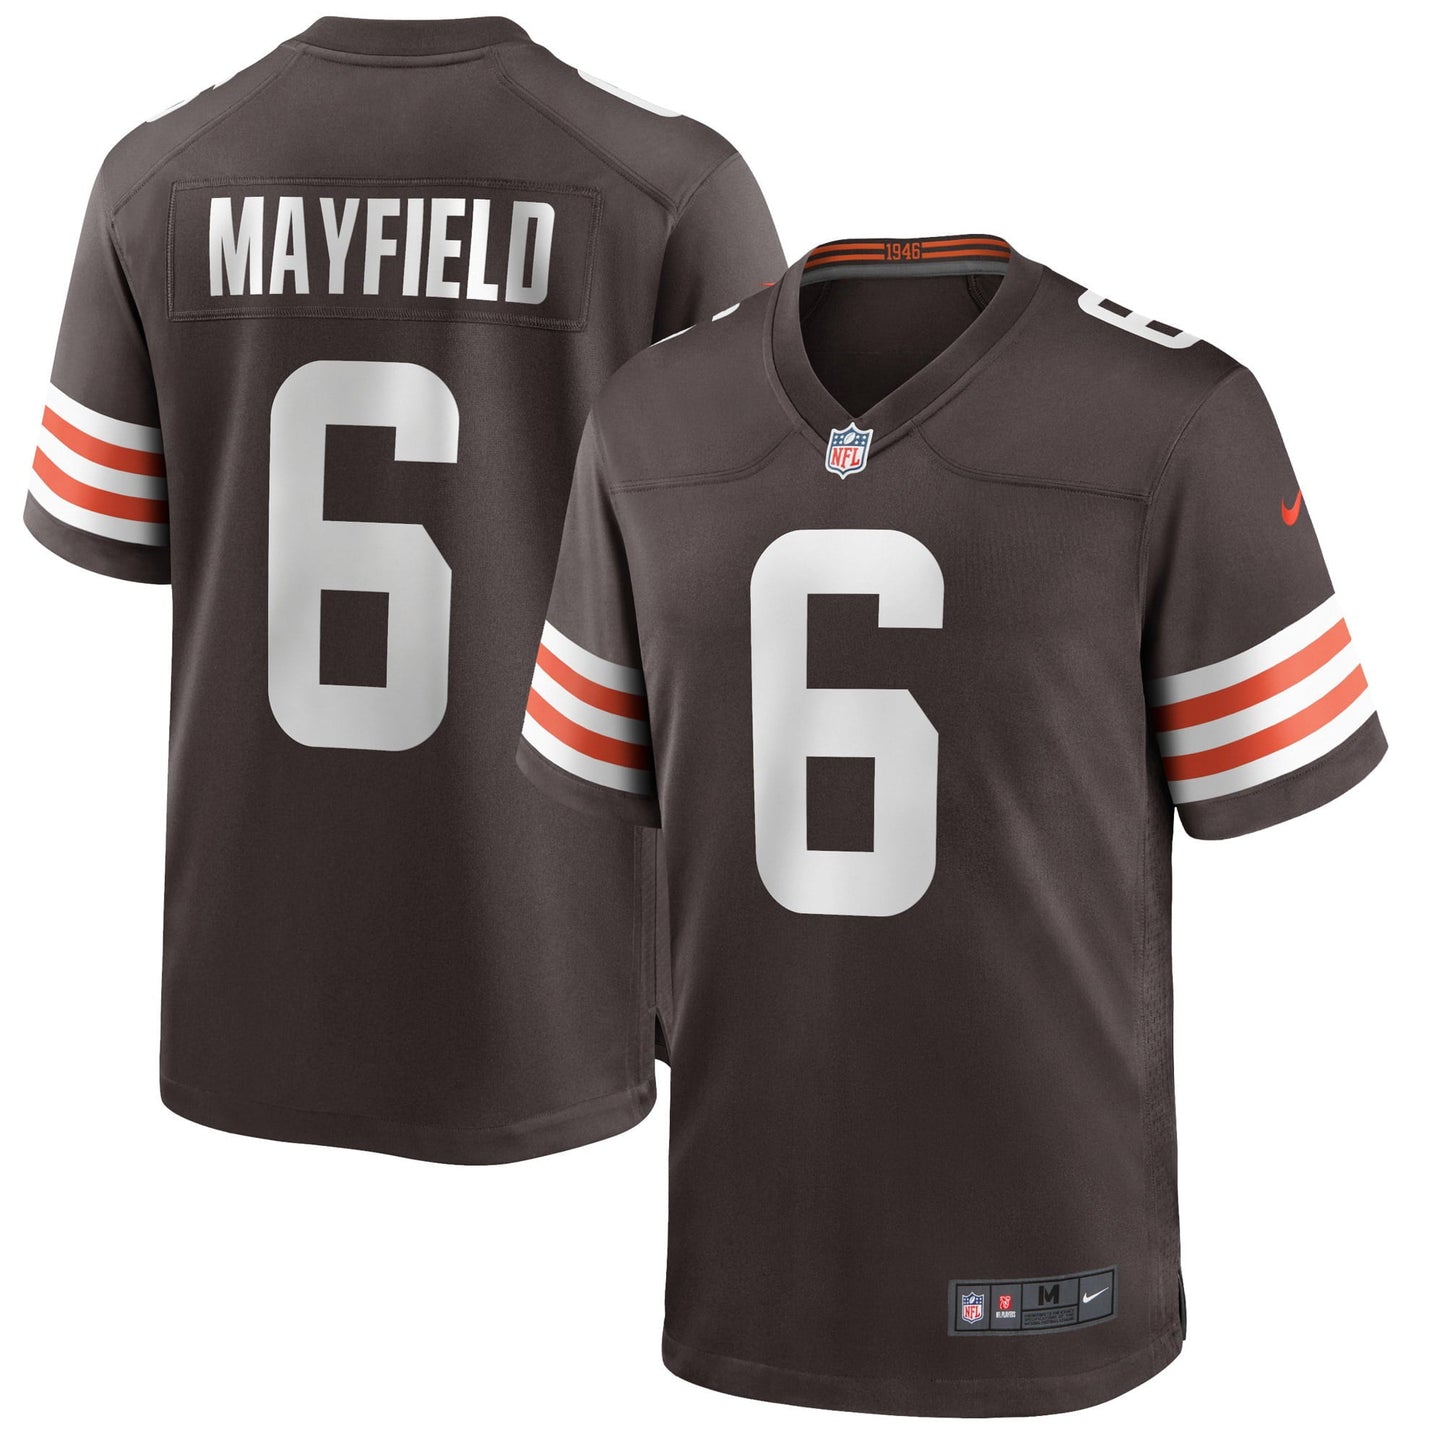 Men's Nike Baker Mayfield Brown Cleveland Browns Game Player Jersey